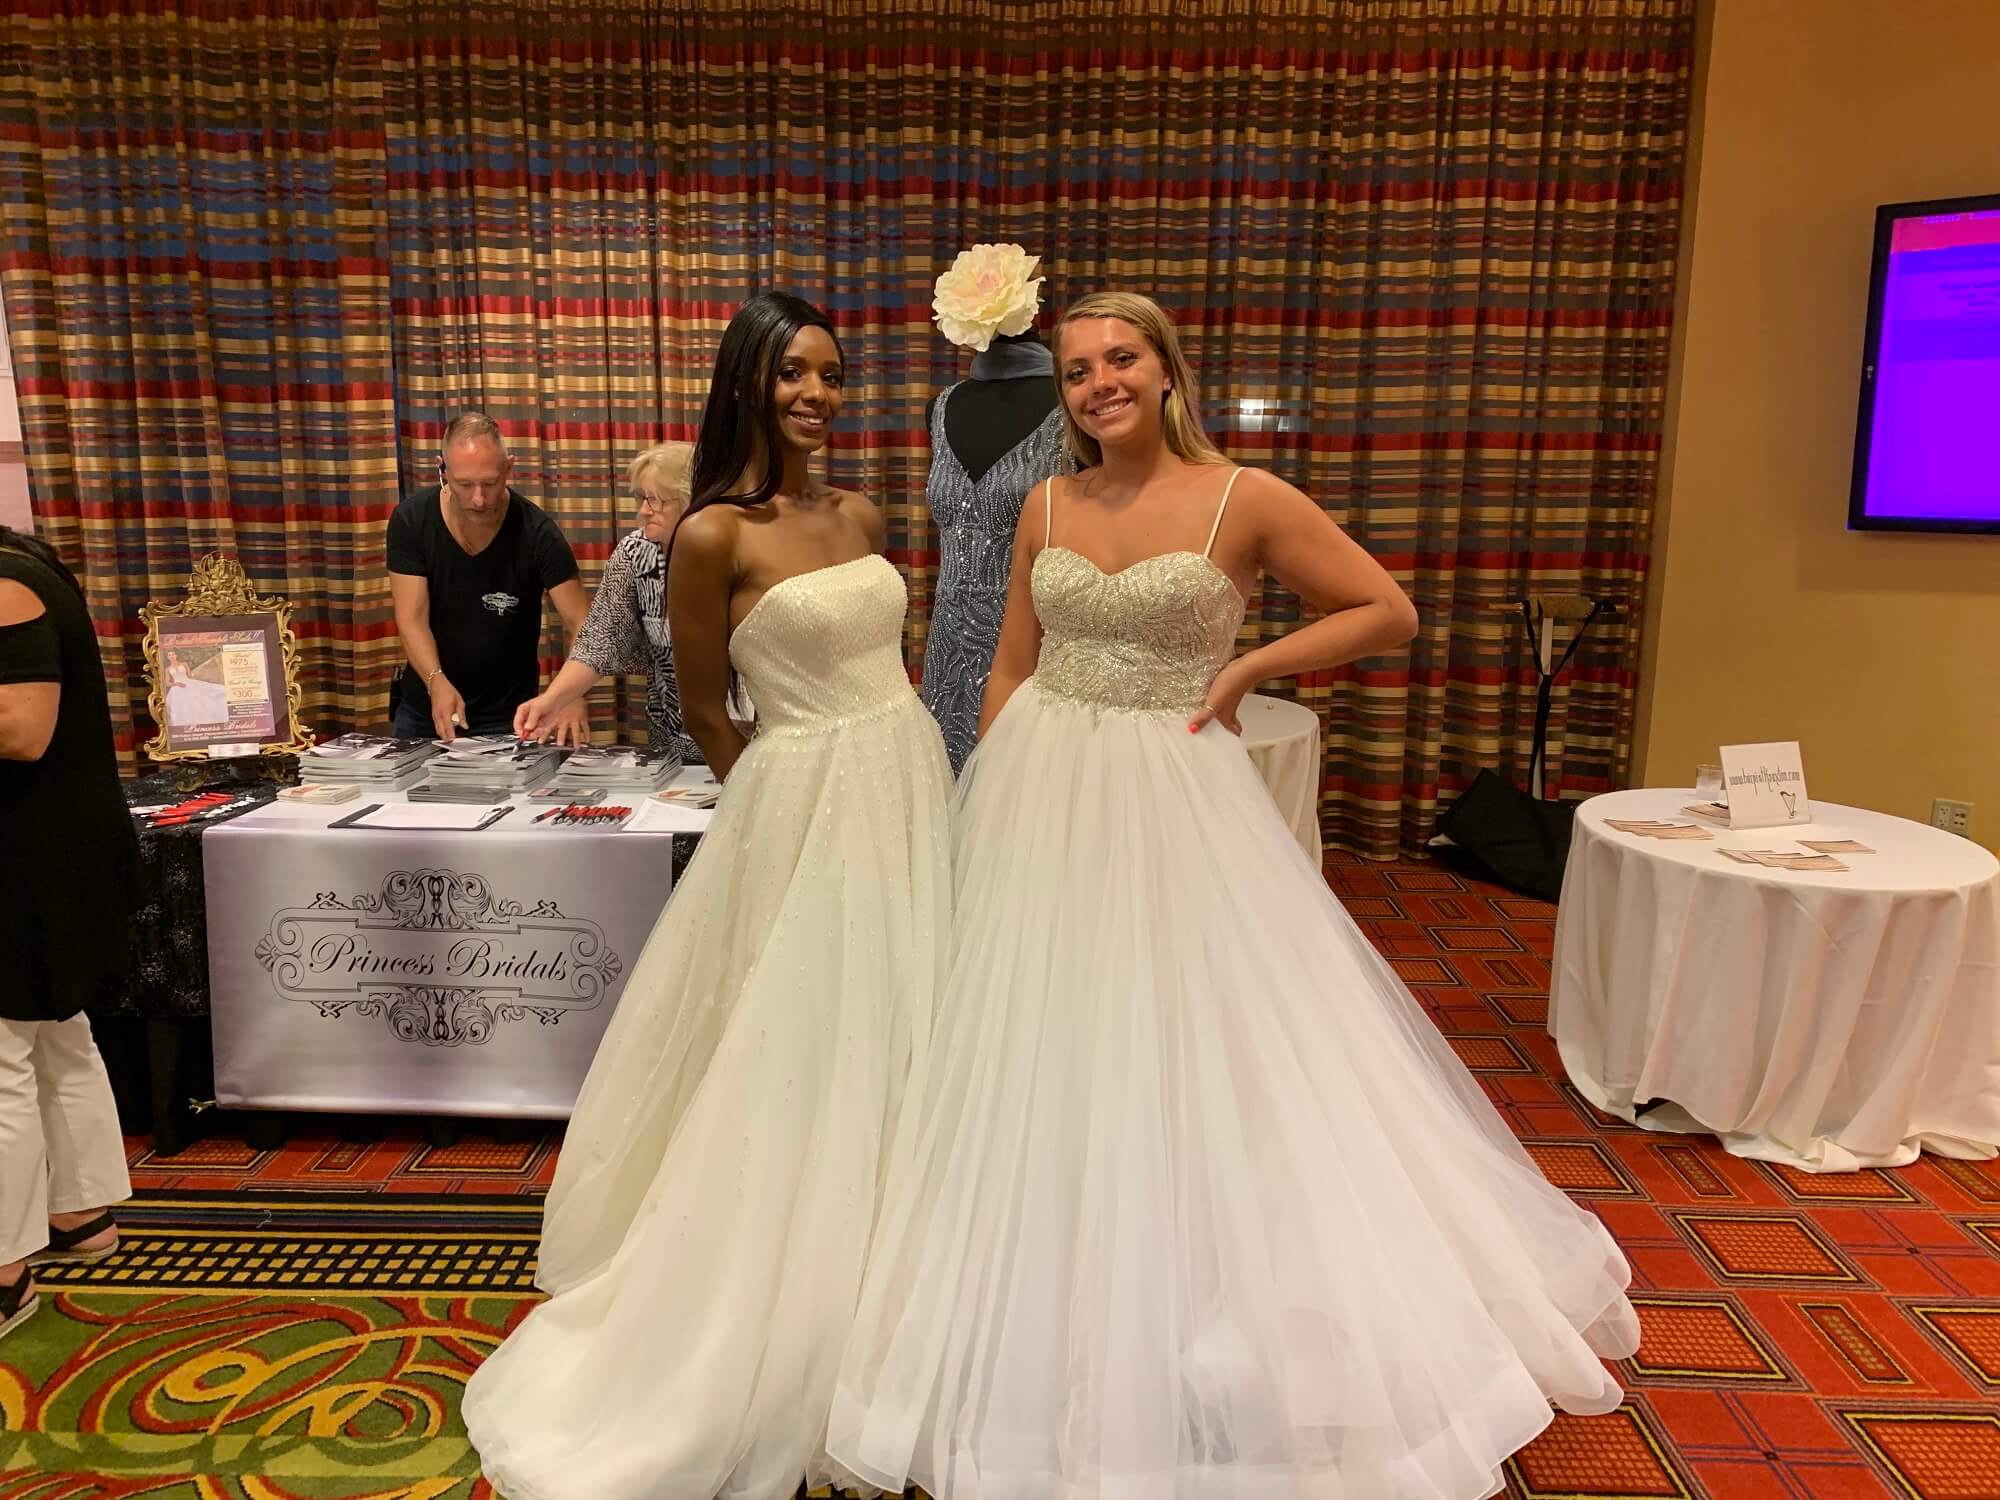 6 Reasons You Should Go to a Bridal Expo